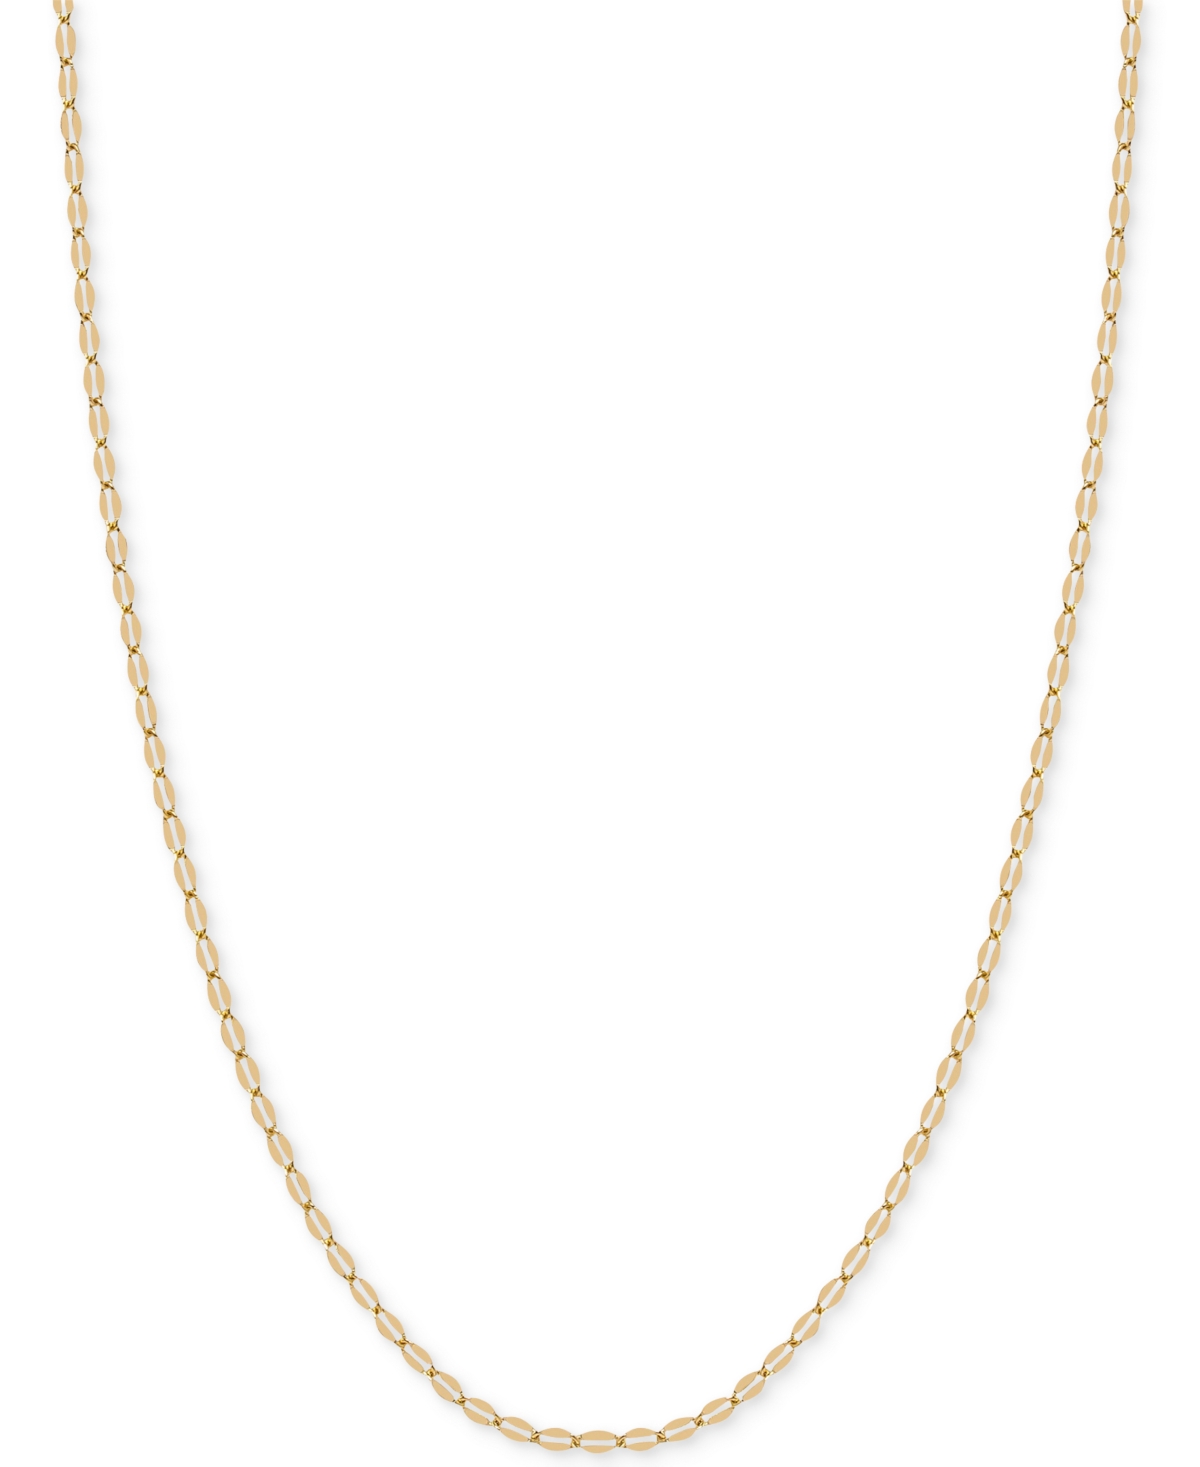 20" Flattened Link Chain Necklace (1-9/10mm) in 14k Gold - Gold